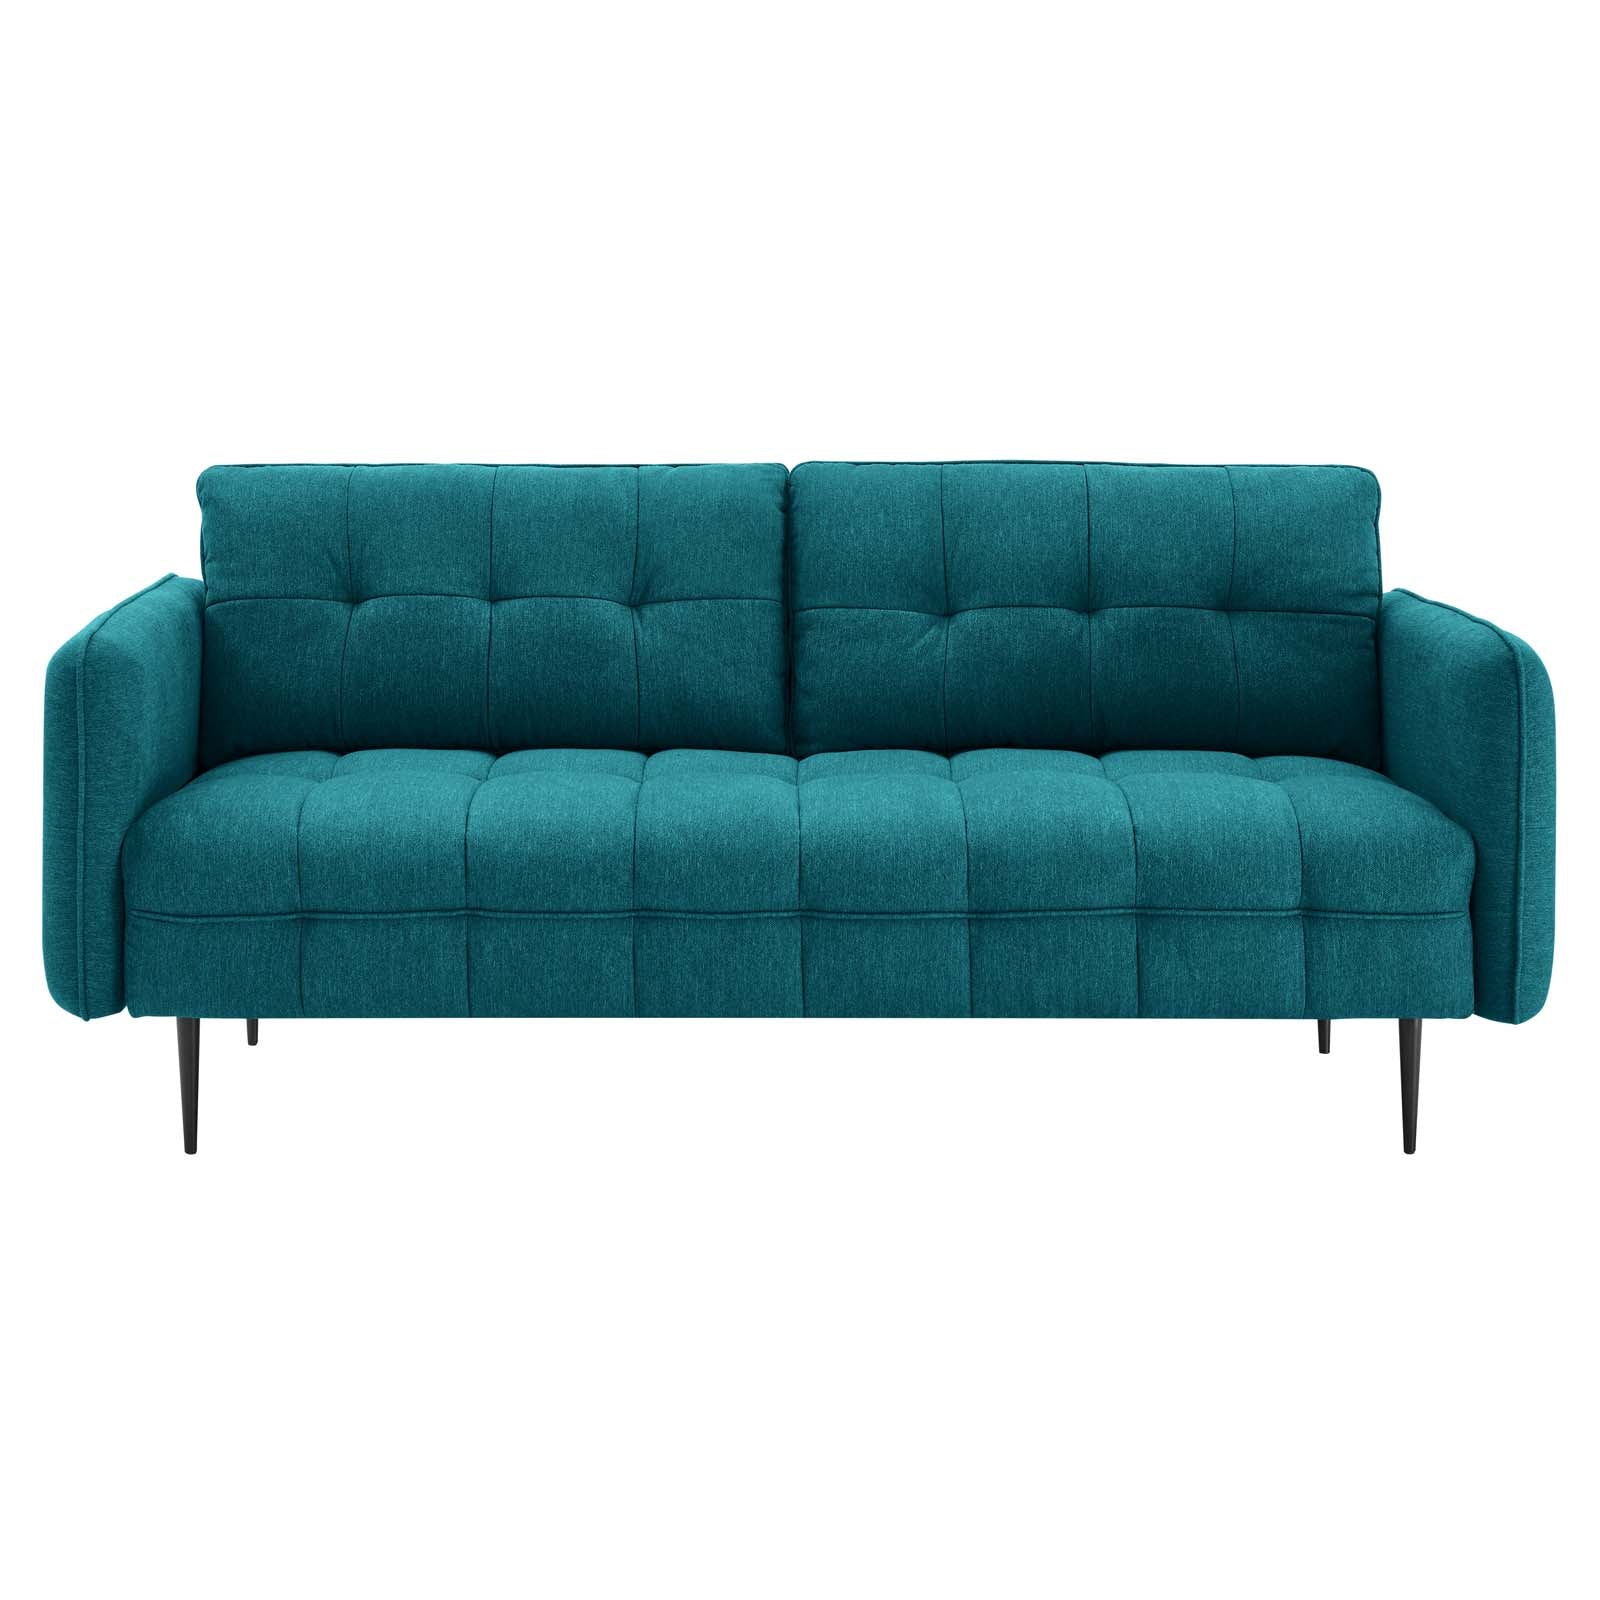 Modway Sofas & Couches - Cameron Tufted Fabric Sofa Teal